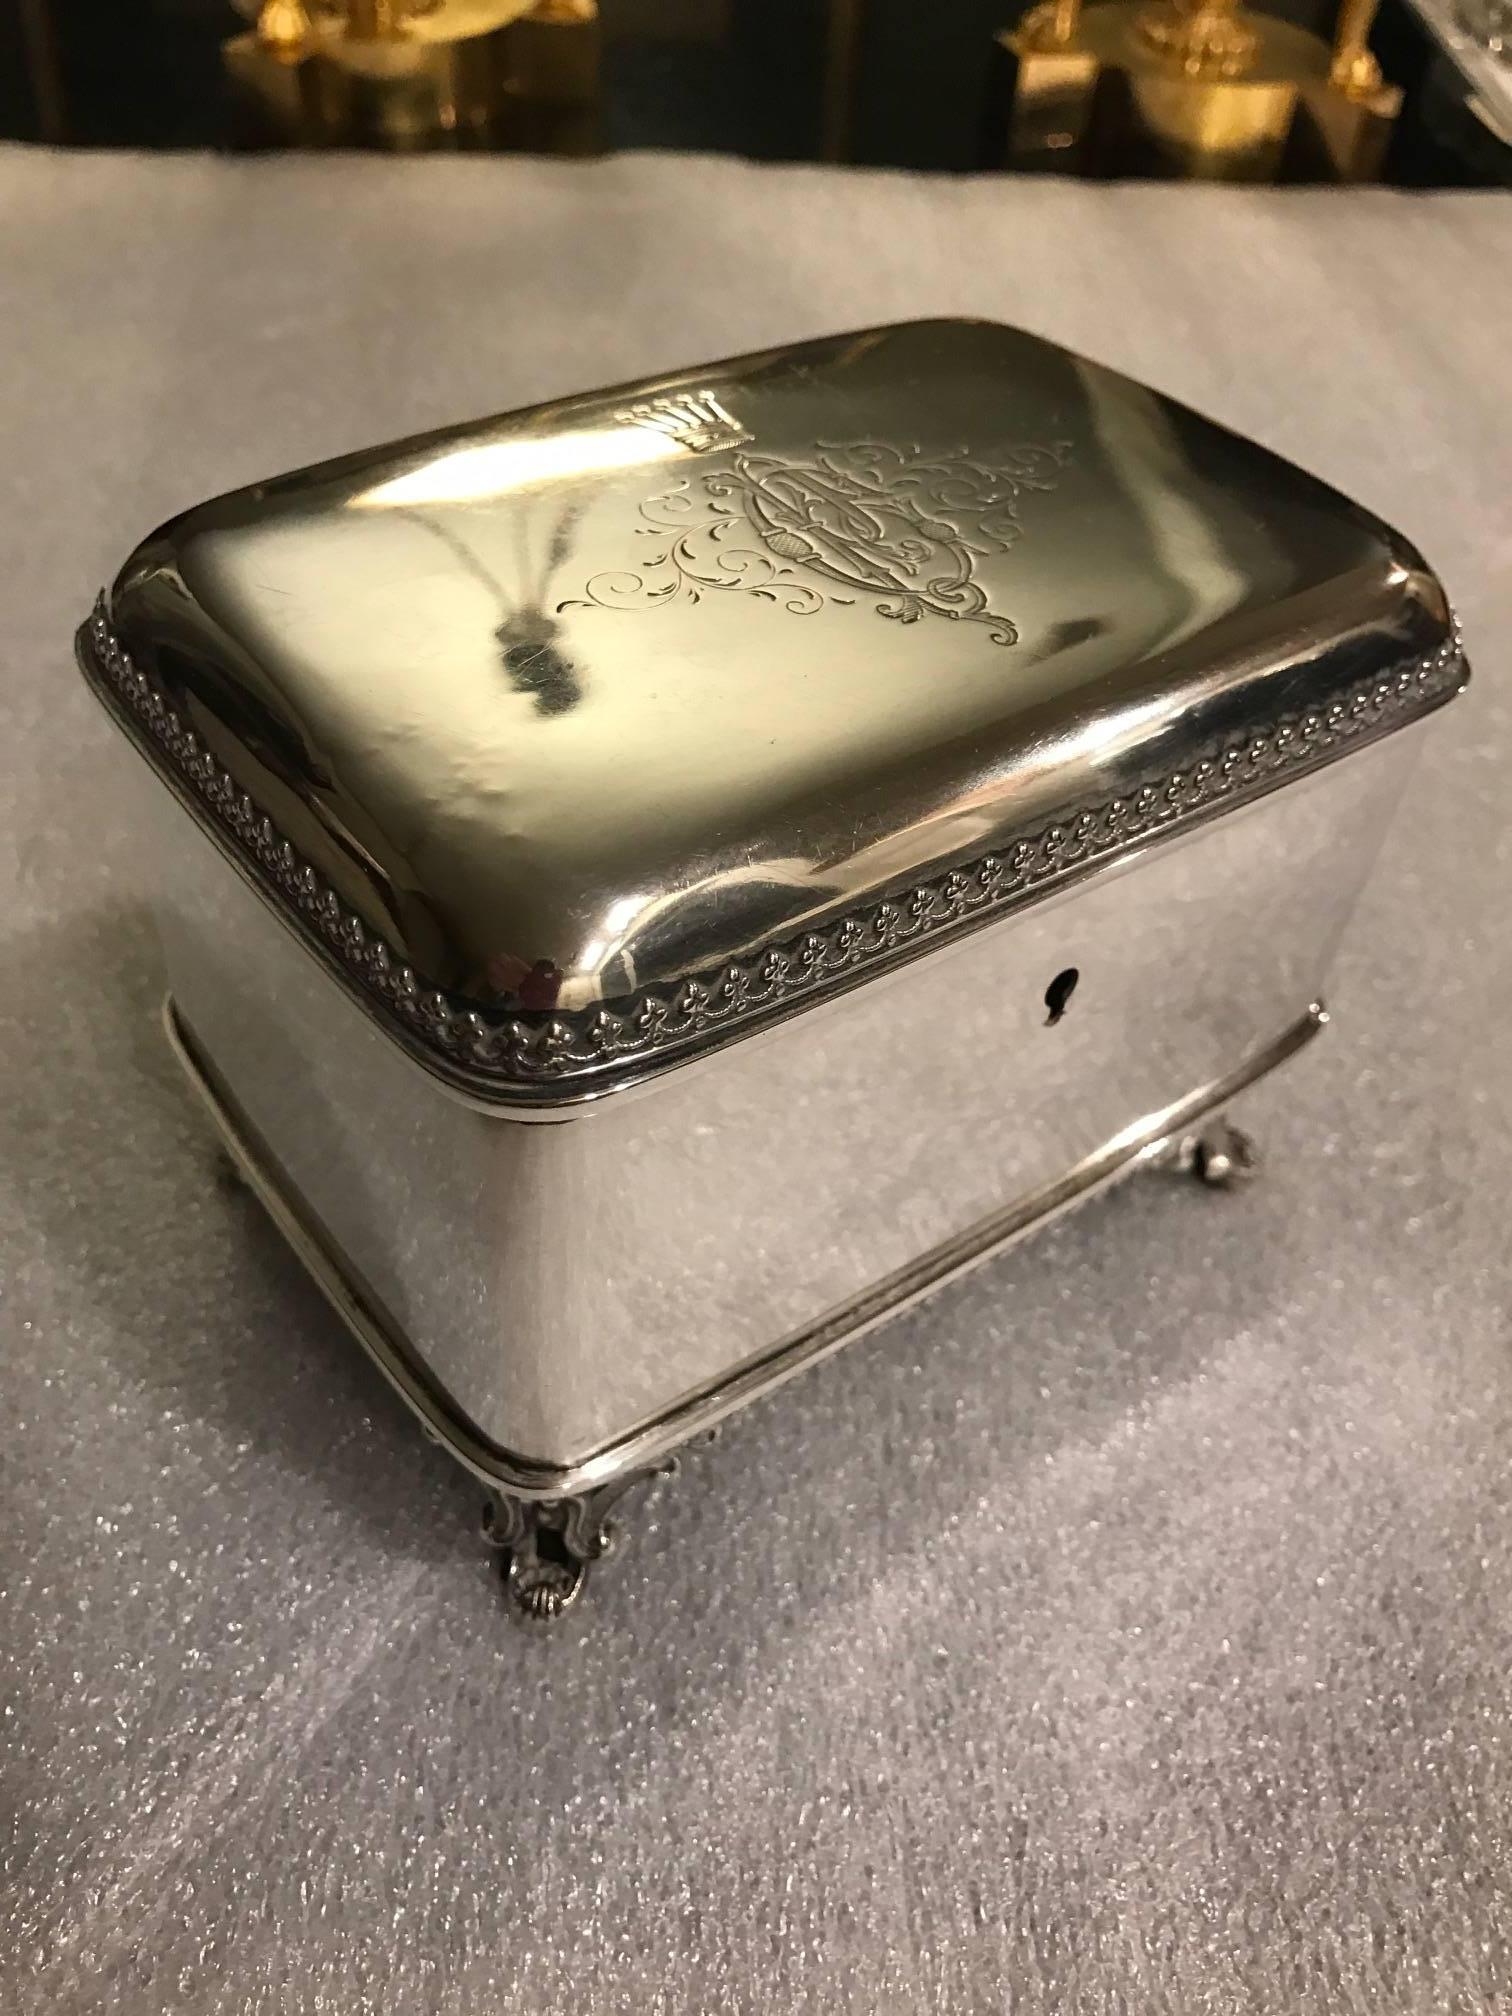 A late 19th century Austrian 900 silver table box with hinged lid. The rounded corners with a beautiful hand engraved monogram with crown of a highly stylized ‘C’ intertwined with a ‘P’. The feet are cast silver with delicate scrolling. The sides of